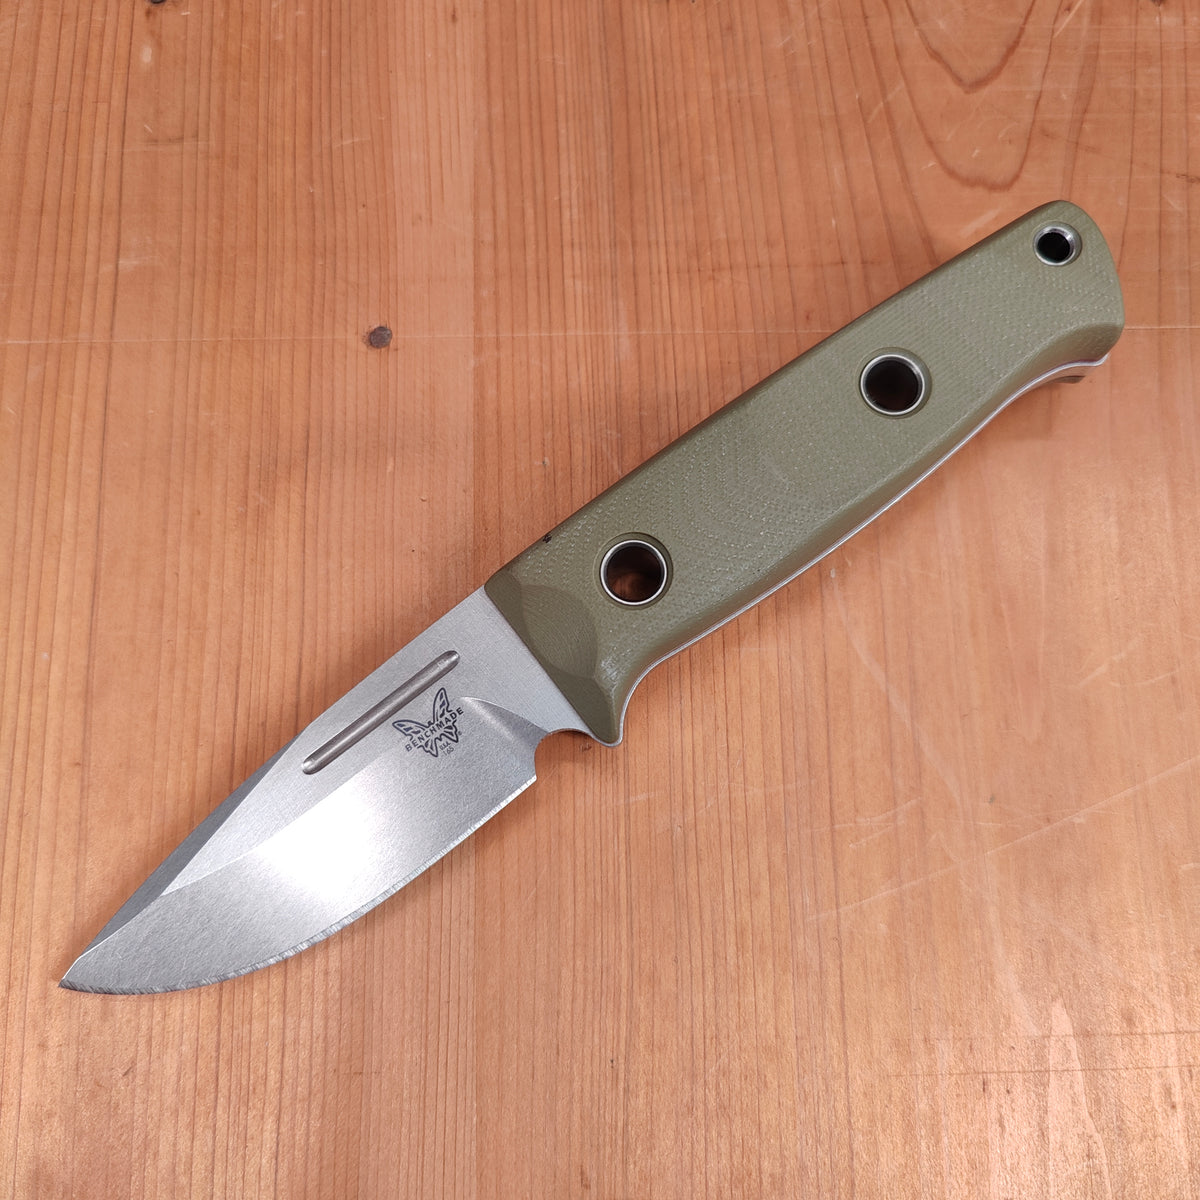 Benchmade 165-1 Mini Bushcrafter 3.4" Drop Point CPM-S30V Fixed Blade OD Green G10 Handle with Leather Sheath